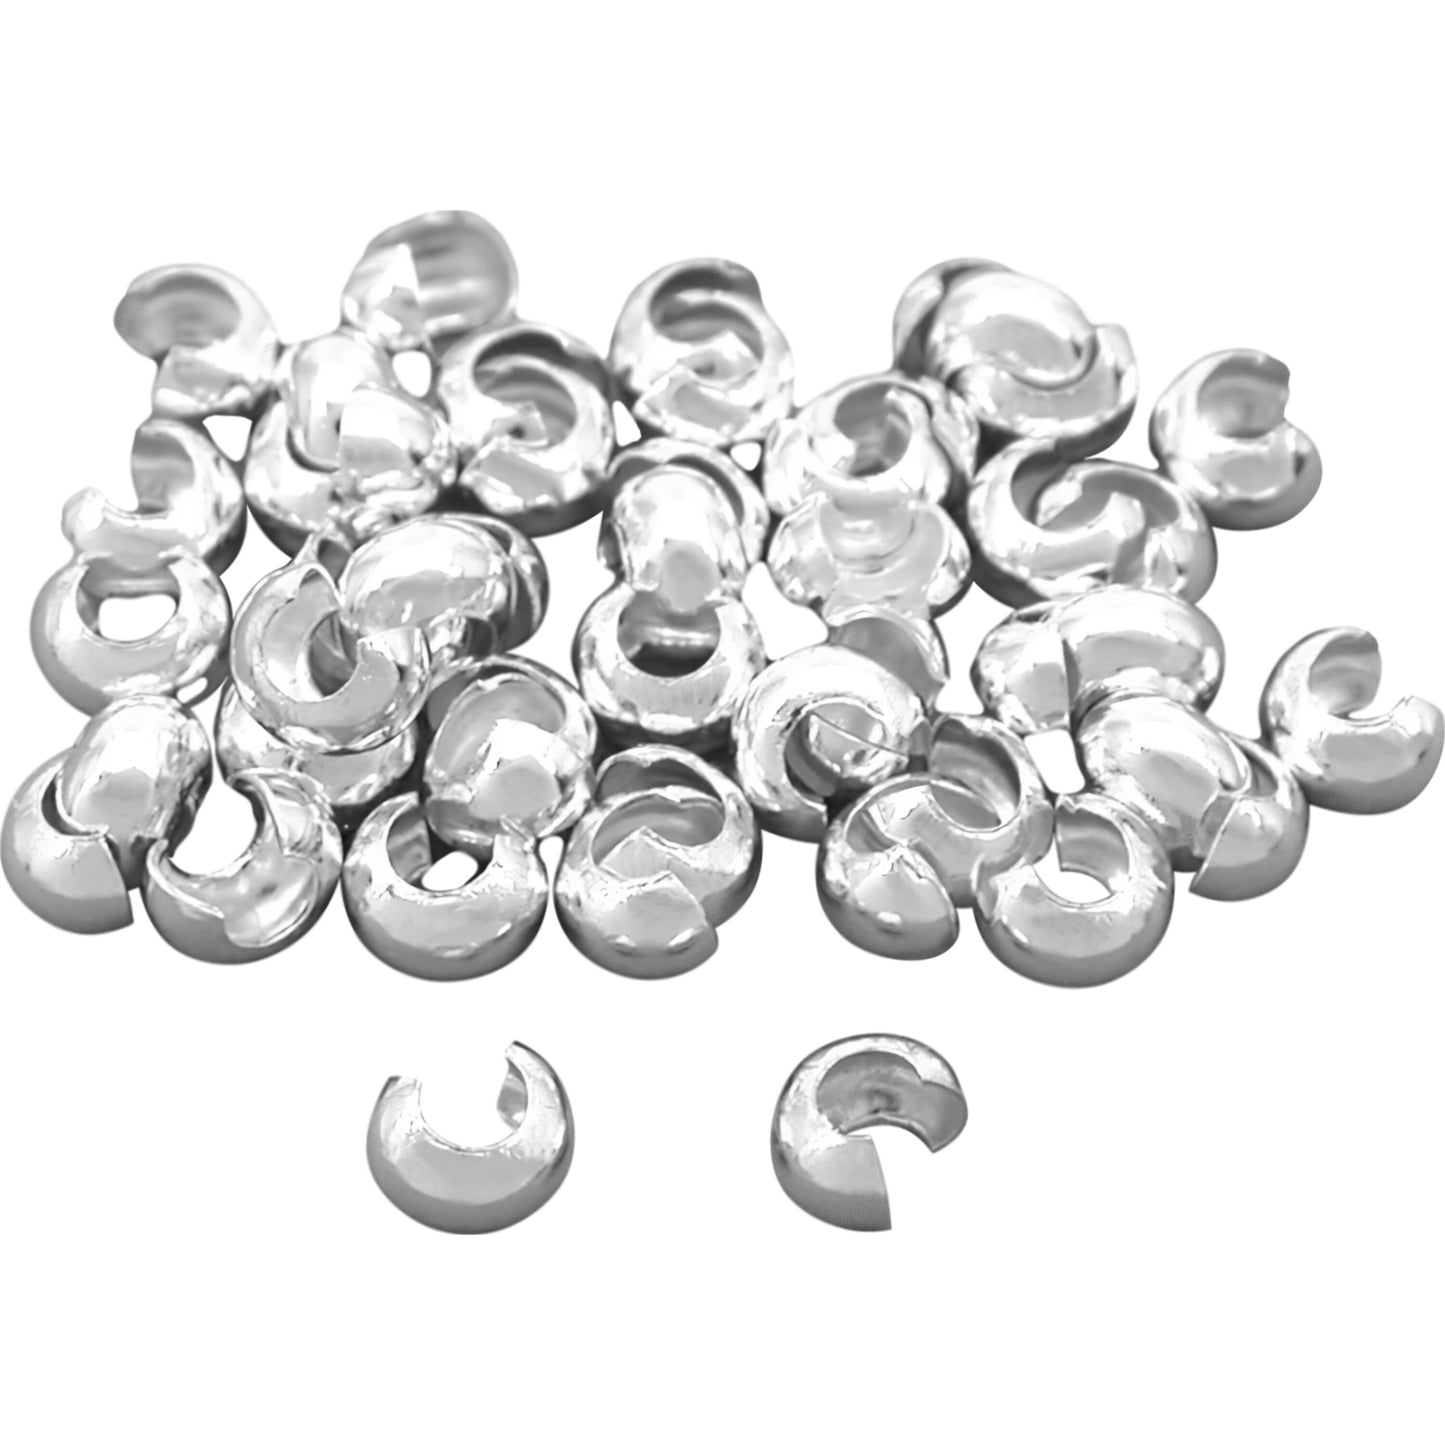 Sterling Silver Crimp Bead Covers 3mm (X20)